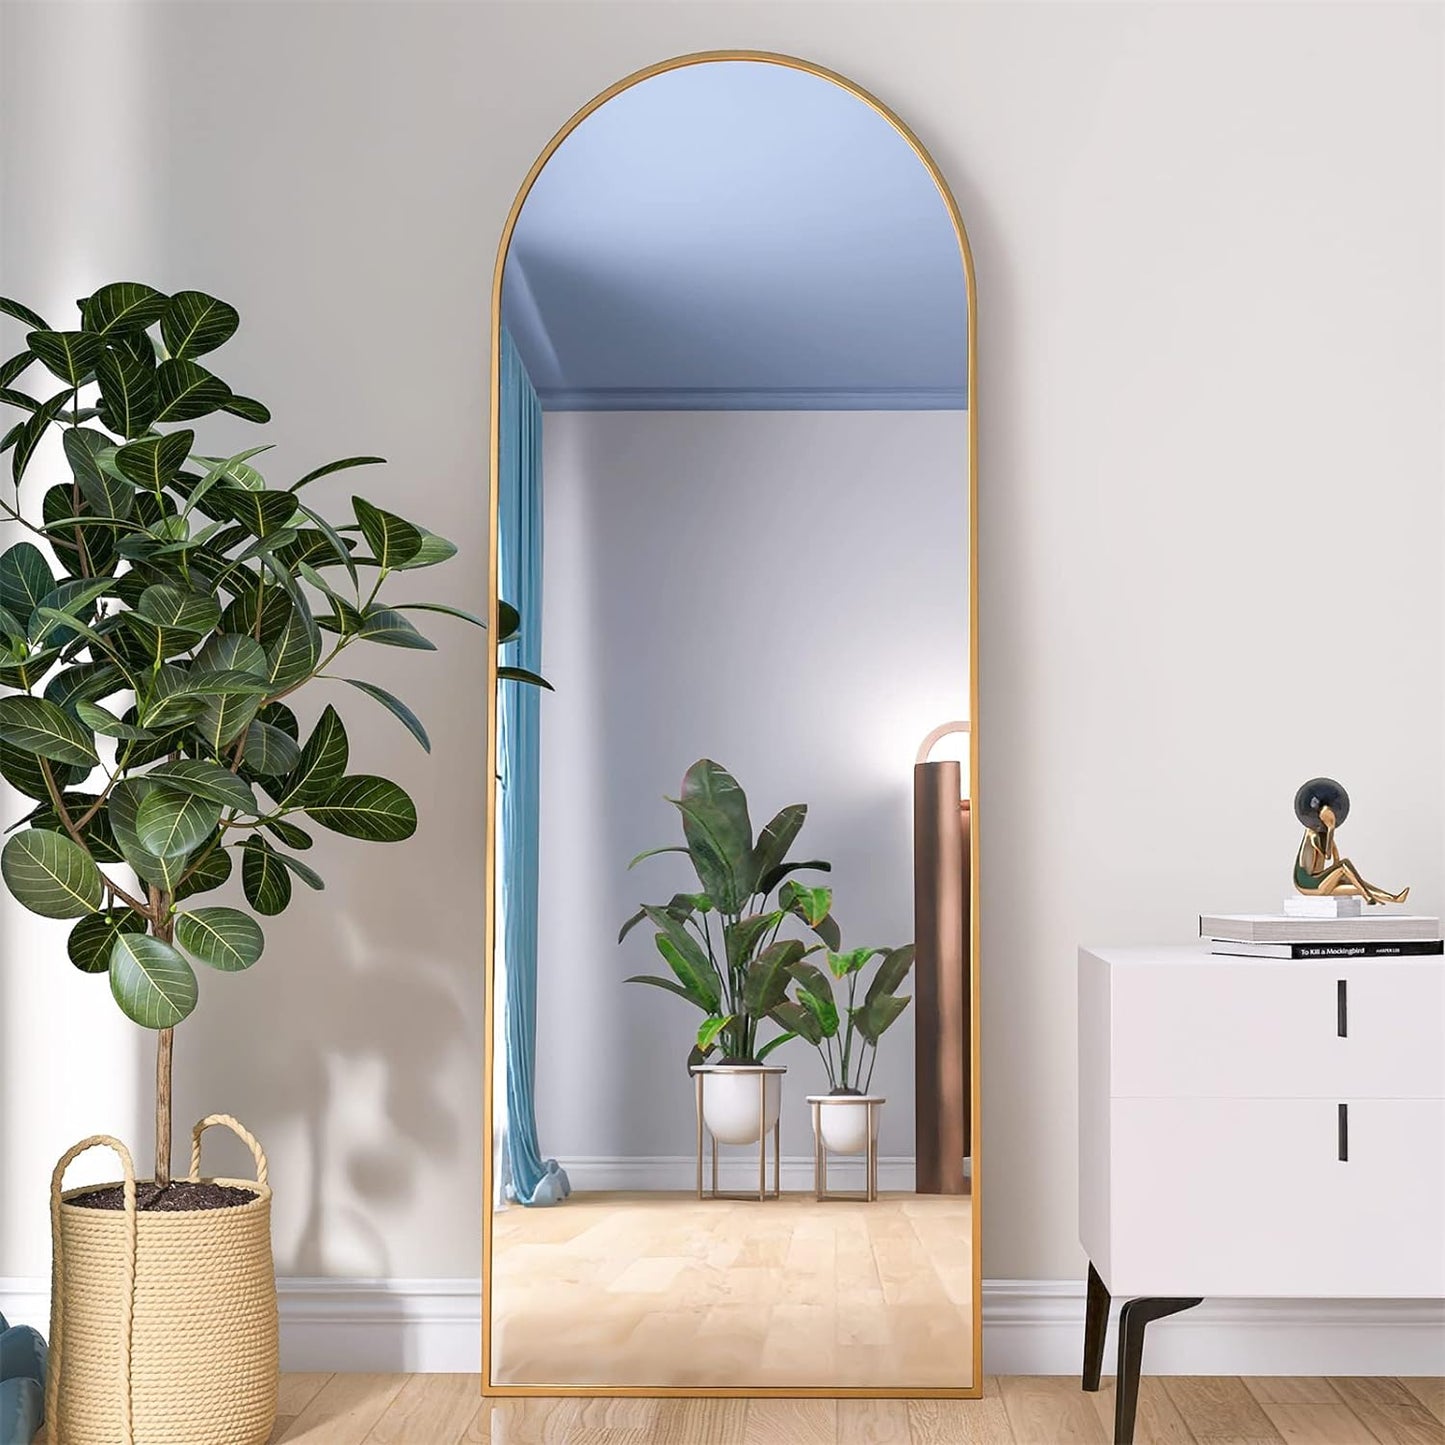 65"X24" Full Body Mirror, Arched Full Length Mirror Free Standing Leaning Mirror Hanging Mounted Mirror Aluminum Frame Modern Tall Mirrors for Living Room Bedroom Cloakroom, Gold